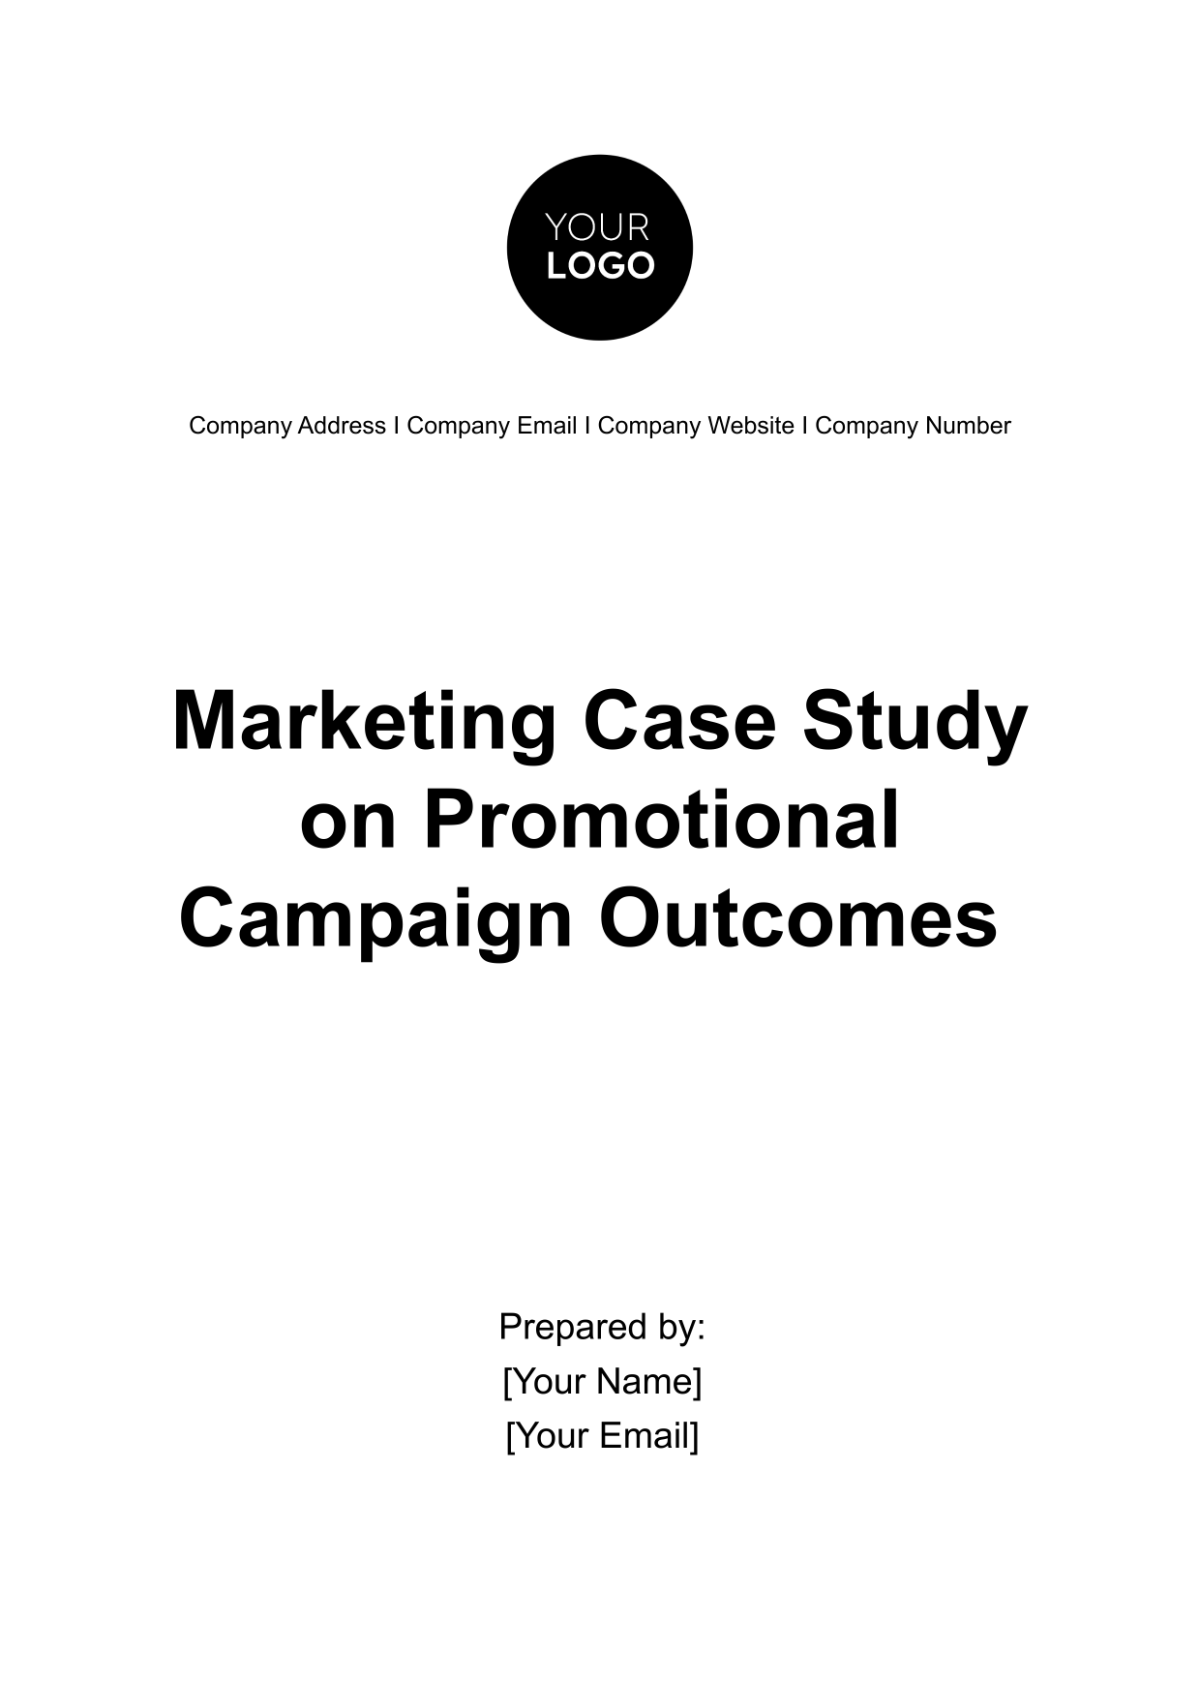 Marketing Case Study on Promotional Campaign Outcomes Template